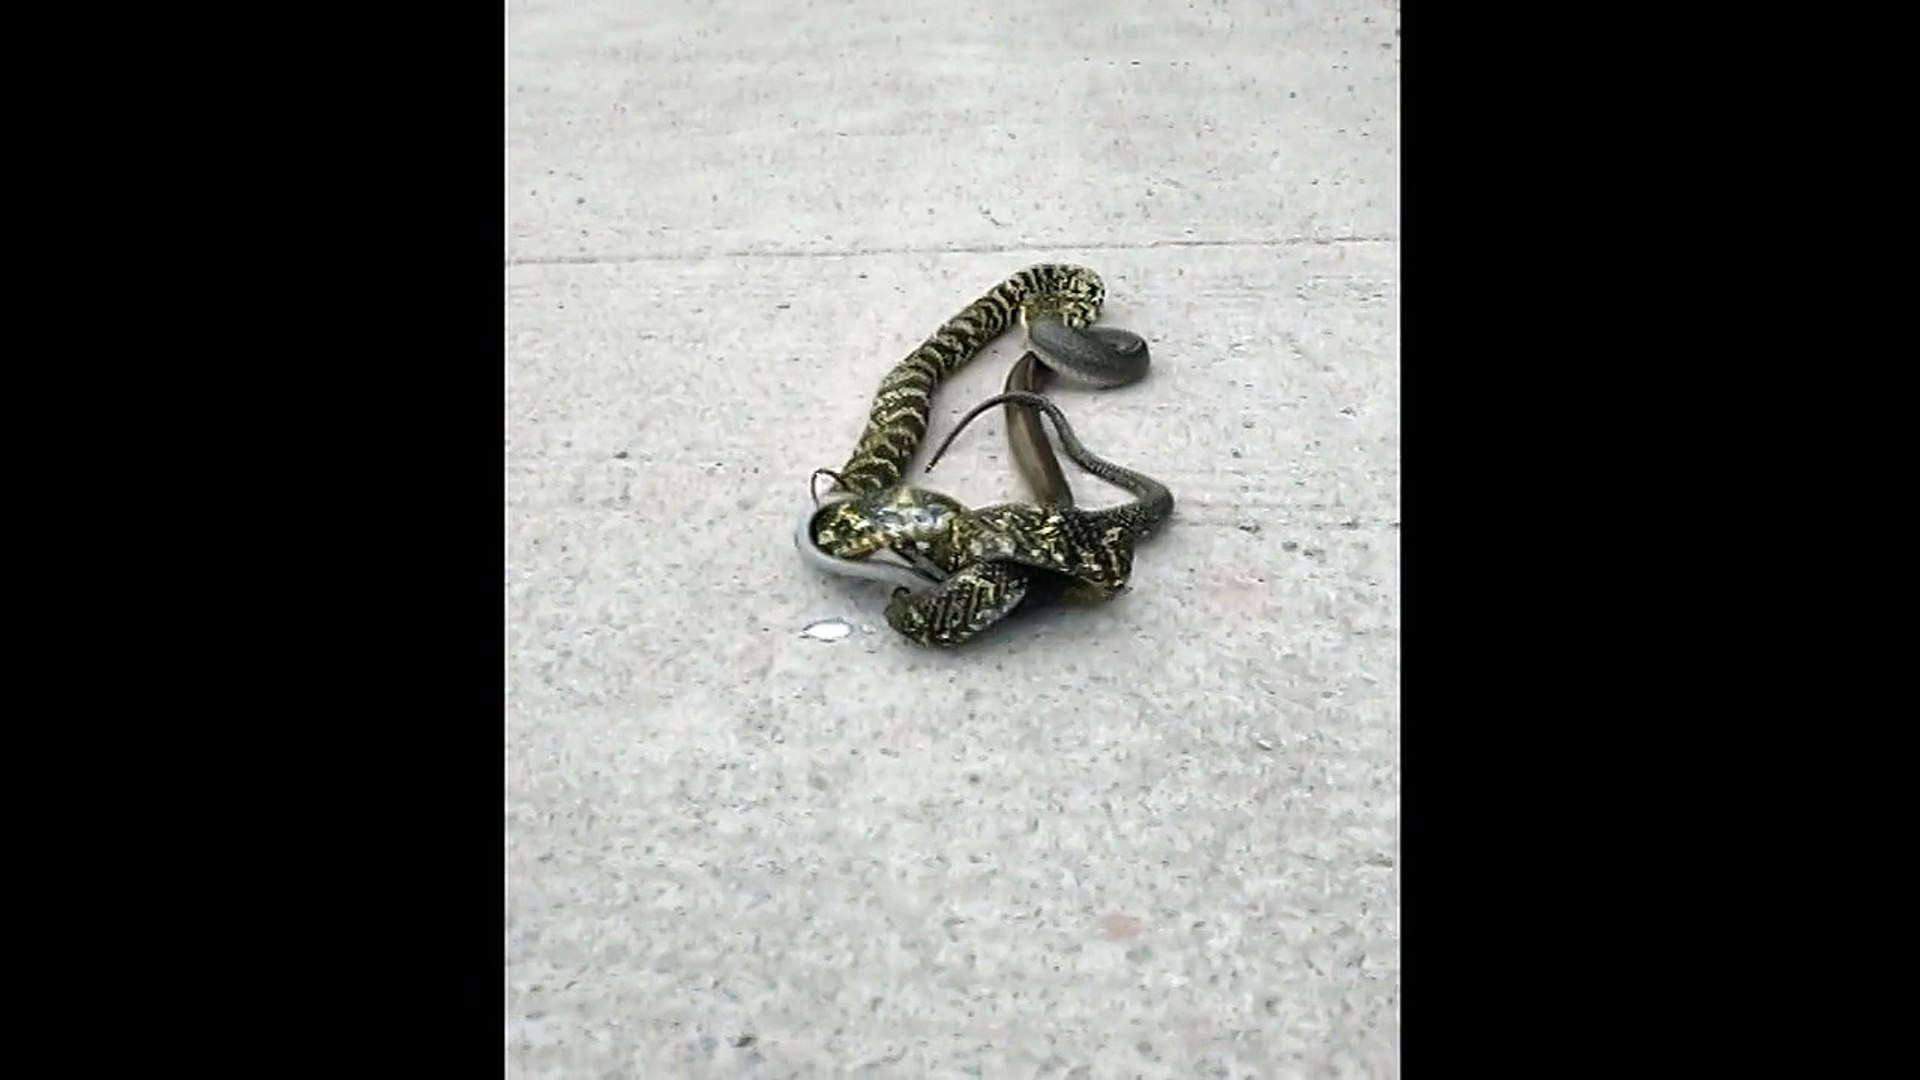 ⁣Snake swallows another snake in epic battle